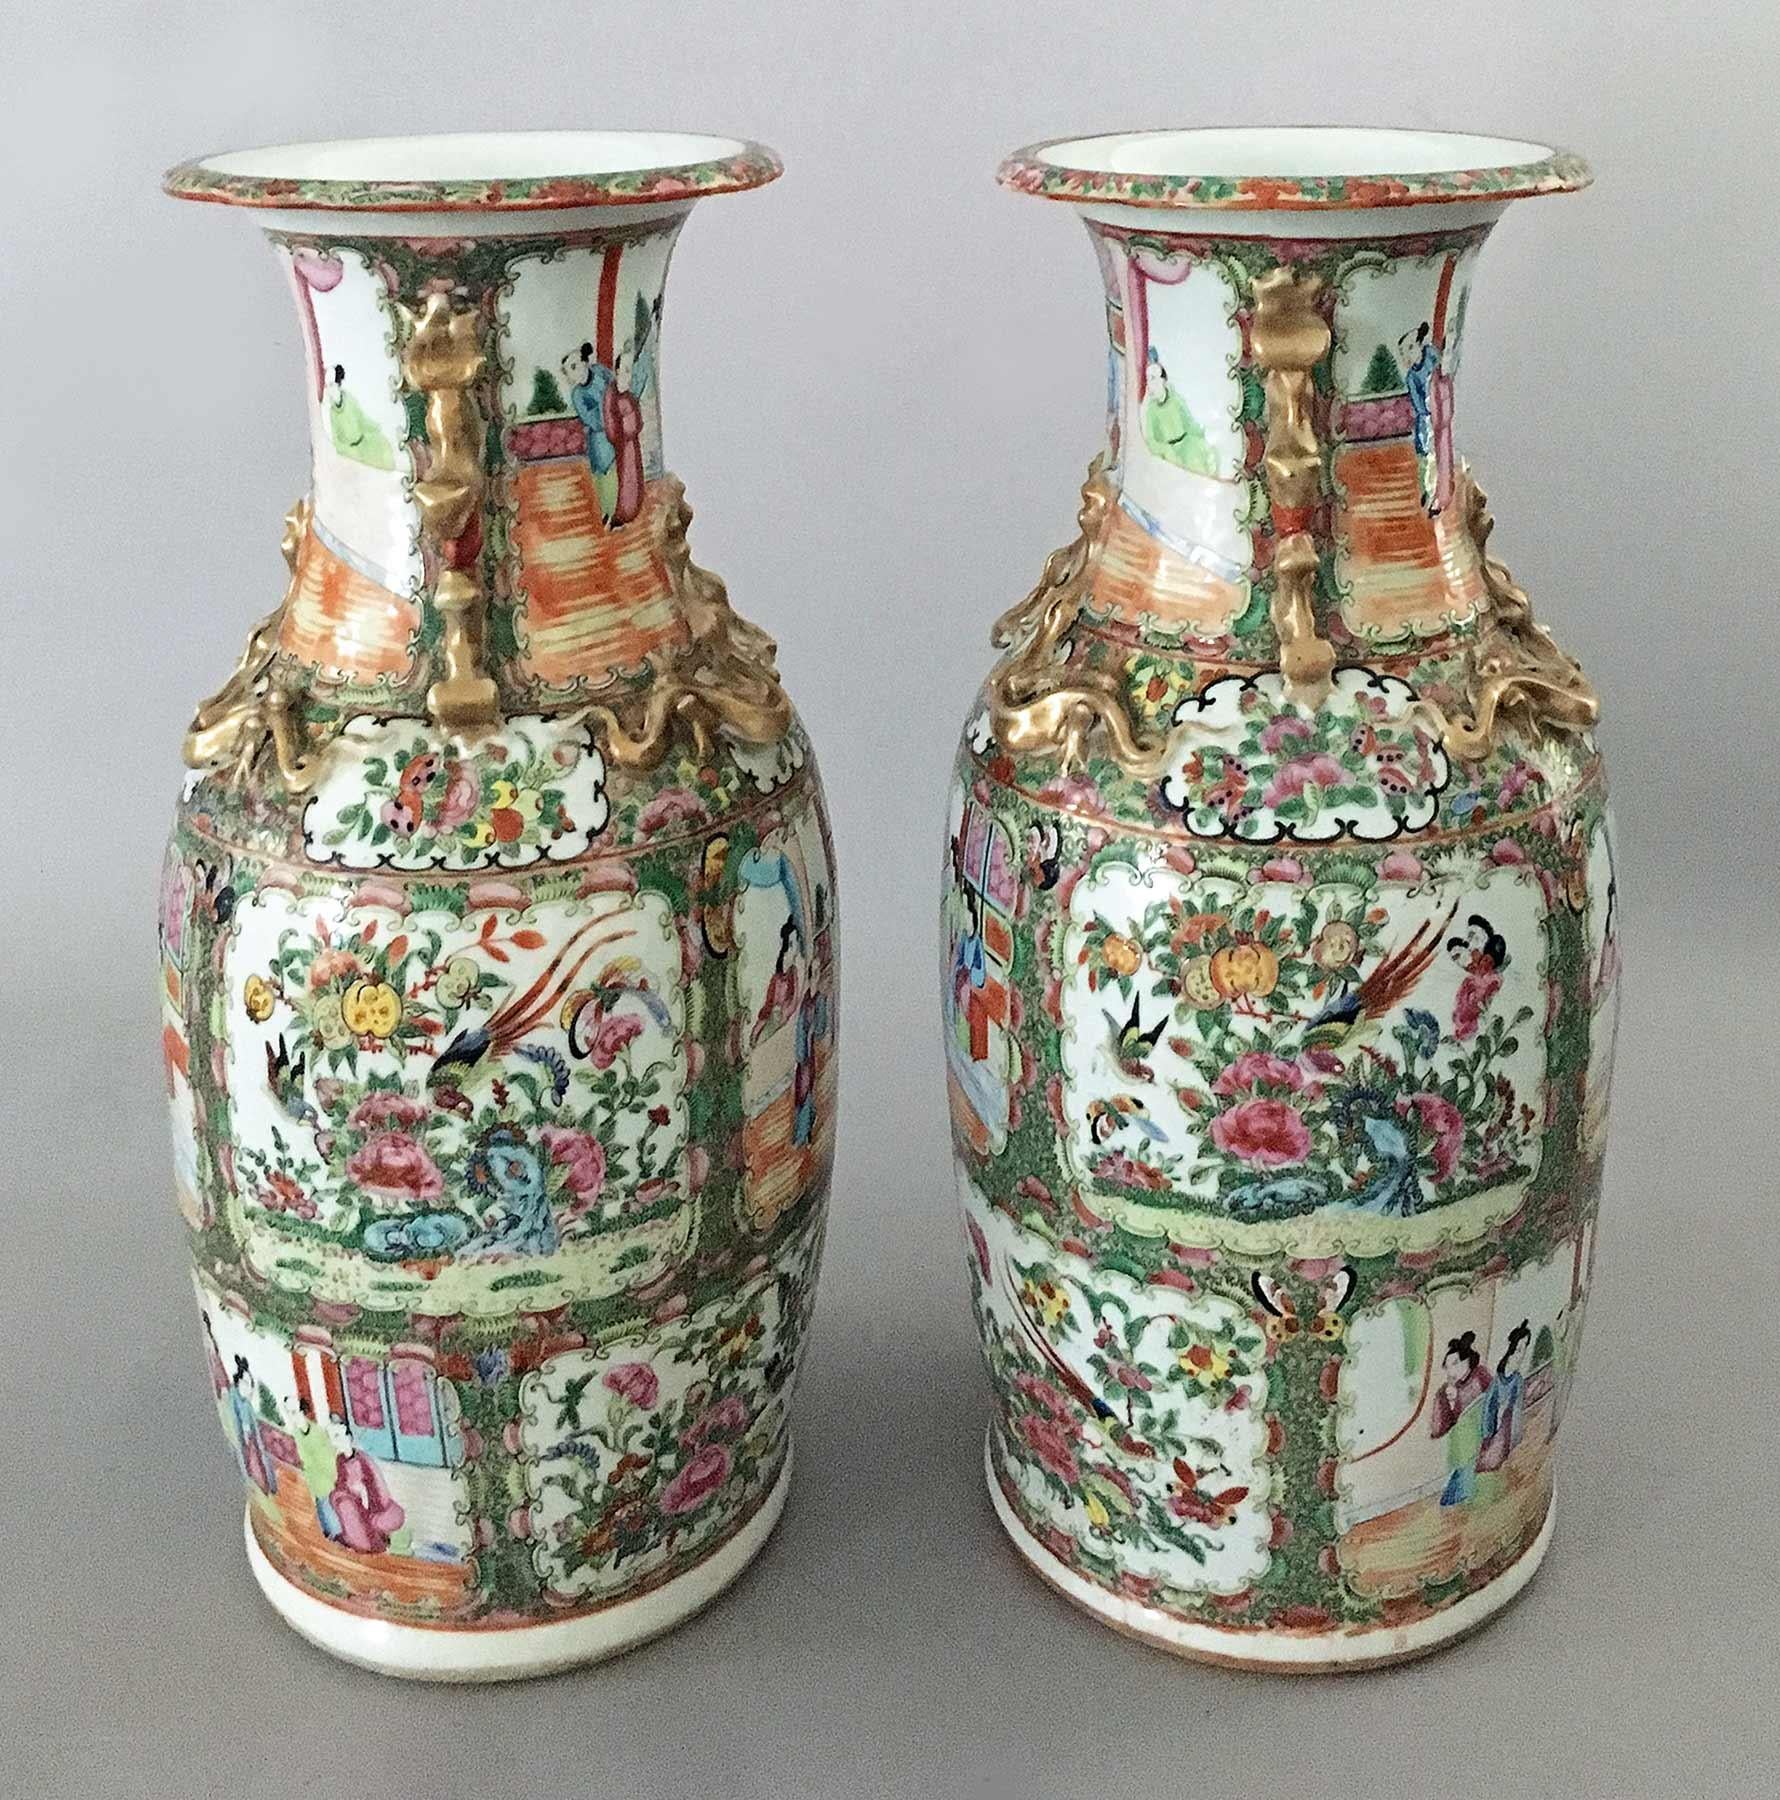 Pair of Chinese Export porcelain rose medallion tall open vases with applied gilded foo dog handles and dragons to neck and shoulder. The body is decorated with eight alternating panels of courtly figures and floral panels with peonies, exotic